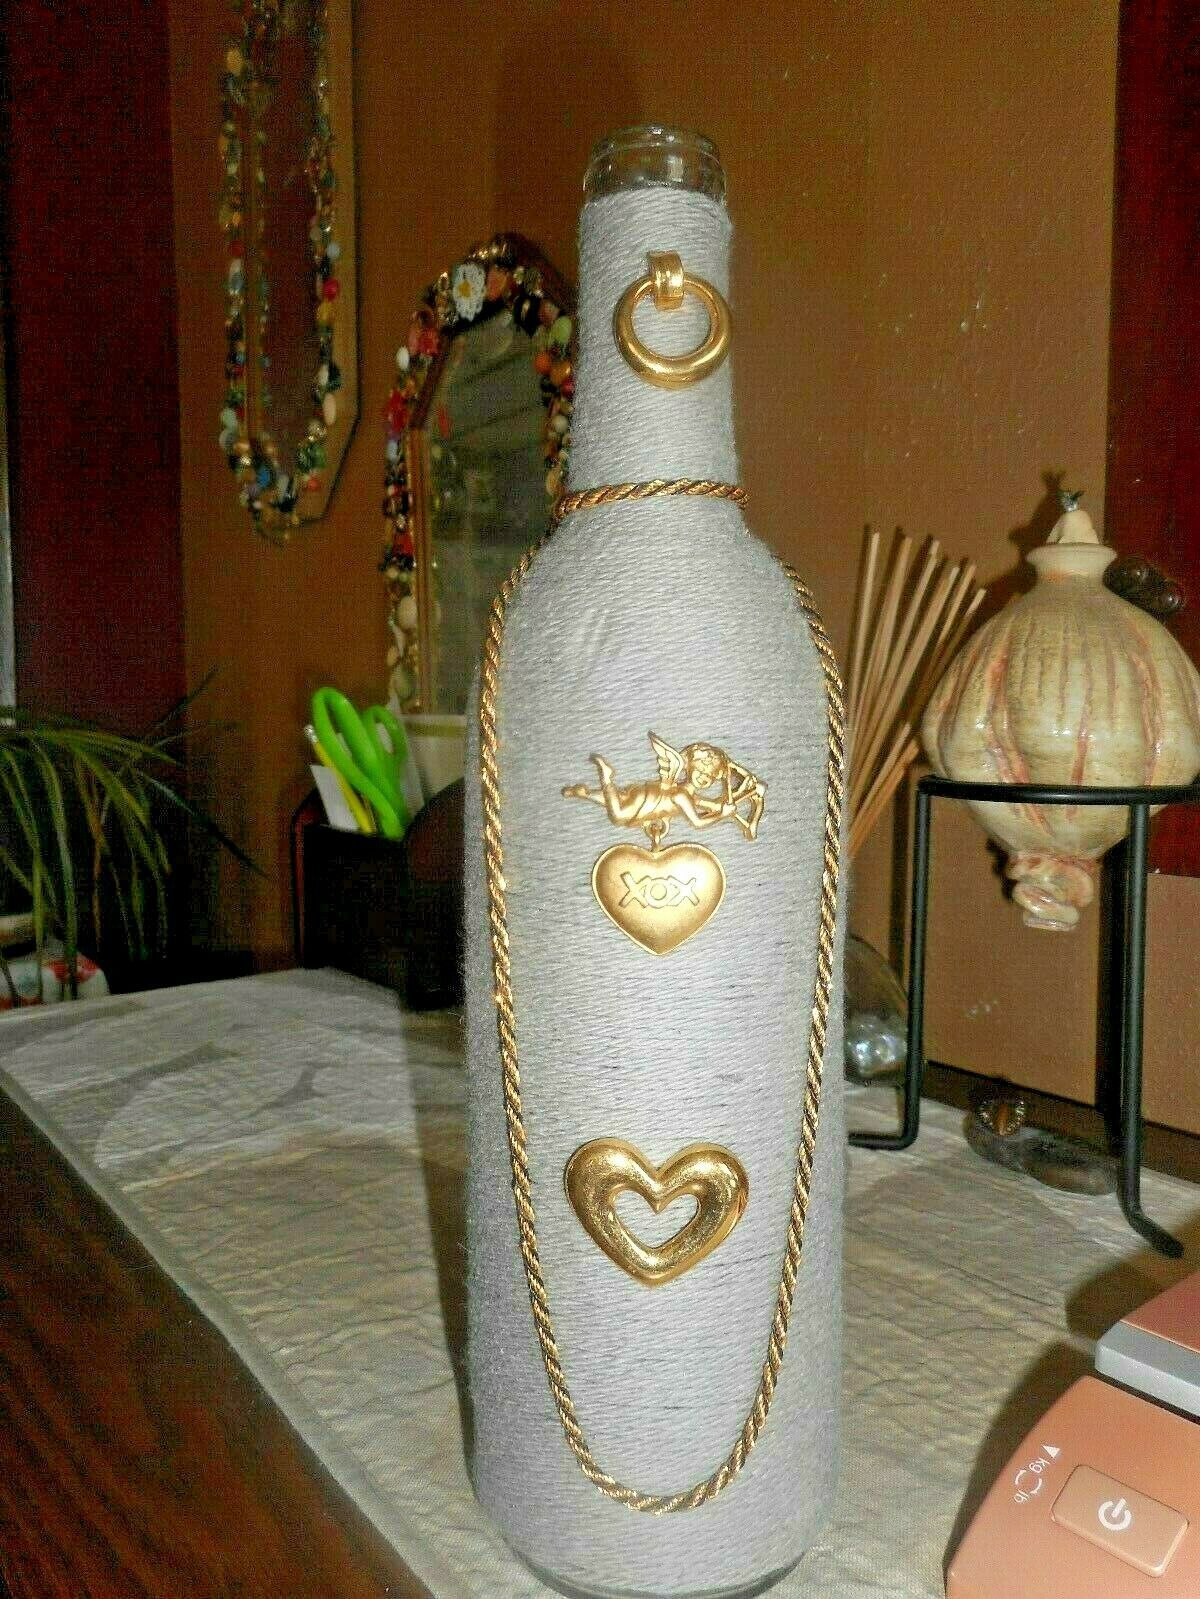 Primary image for Home Decorative Decor Clear Glass Wine Bottle Multi-colored-OOAK=CRAFTED BY HAND